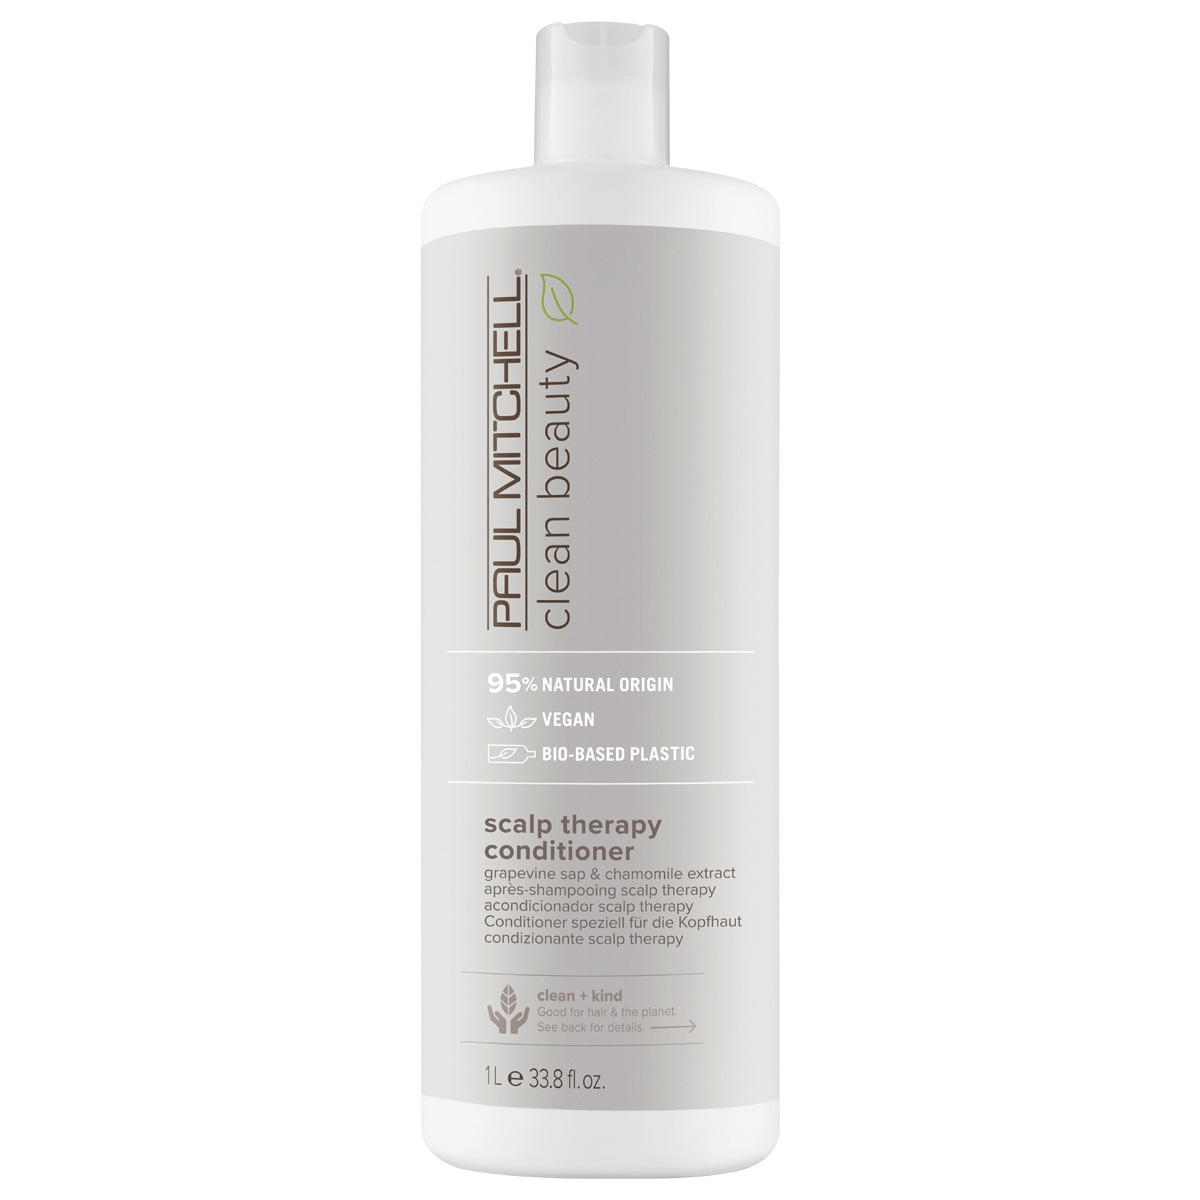 Paul Mitchell Clean Beauty Scalp Therapy Conditioner 1 Liter